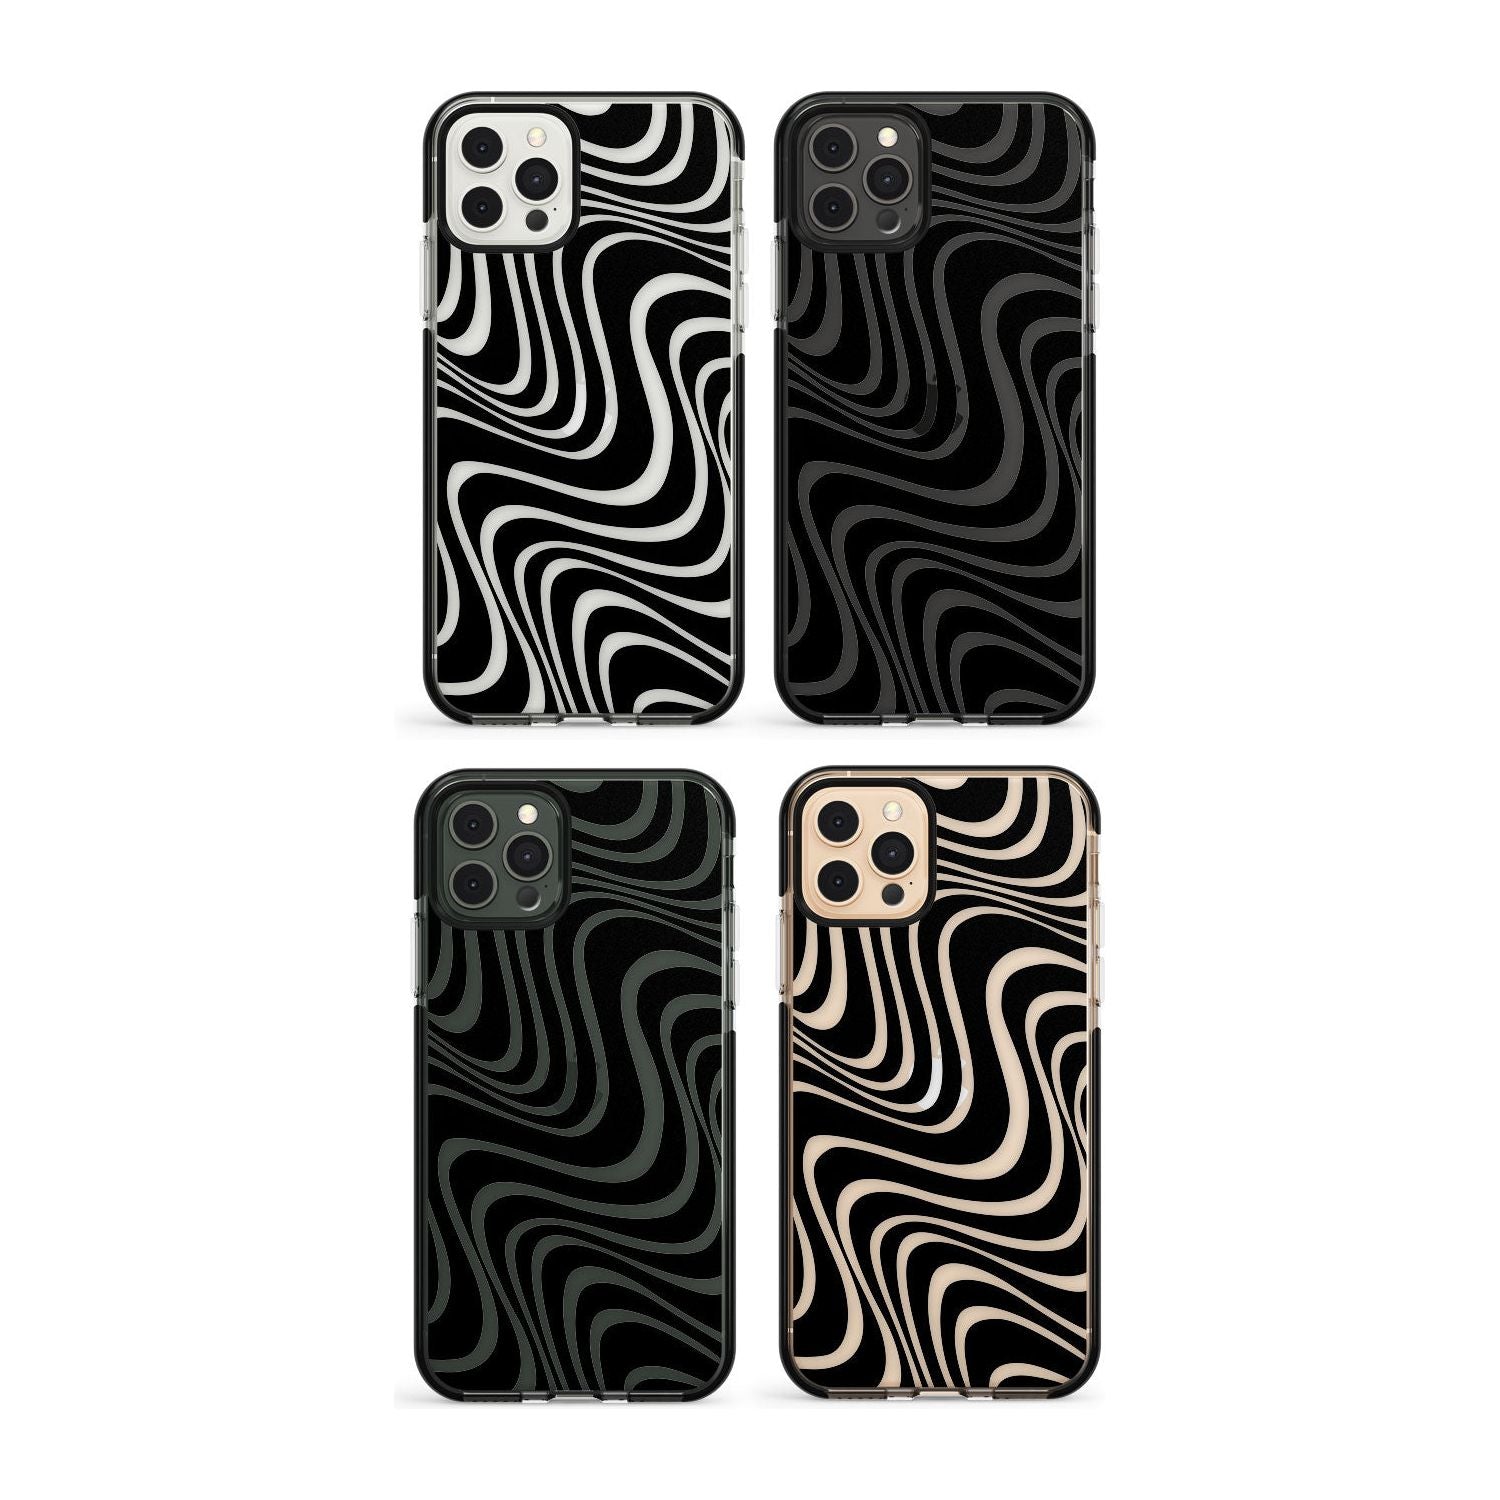 Damascus Steel Impact Phone Case for iPhone 11, iphone 12